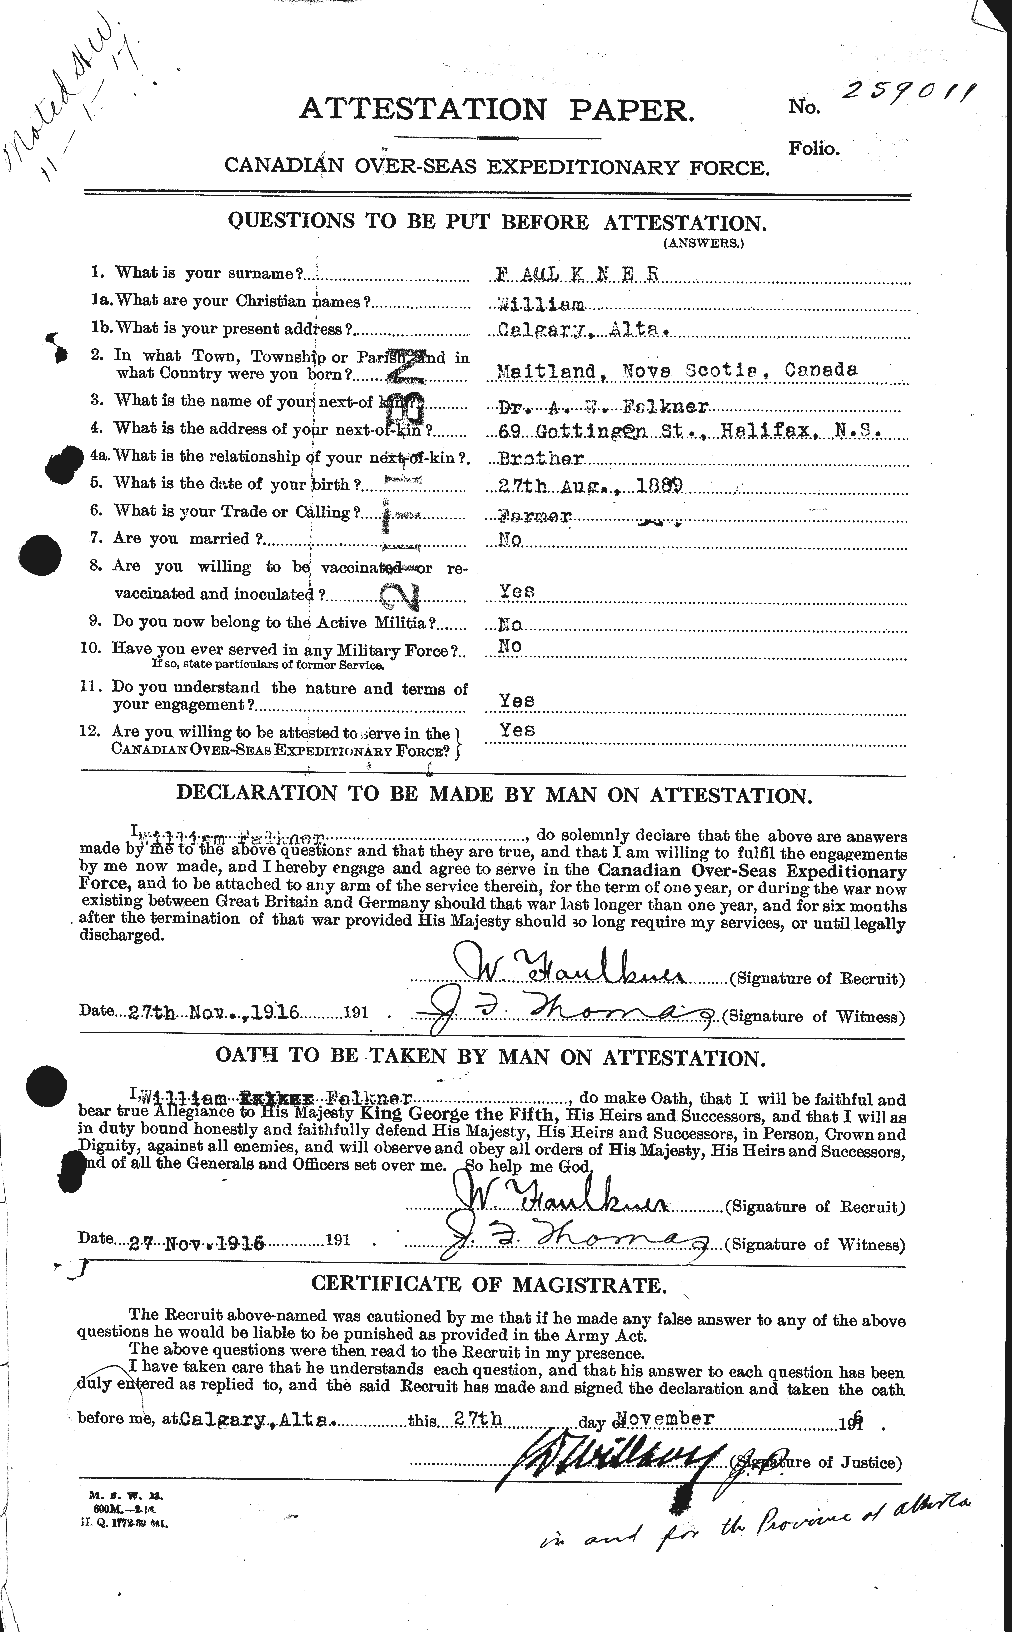 Personnel Records of the First World War - CEF 321319a